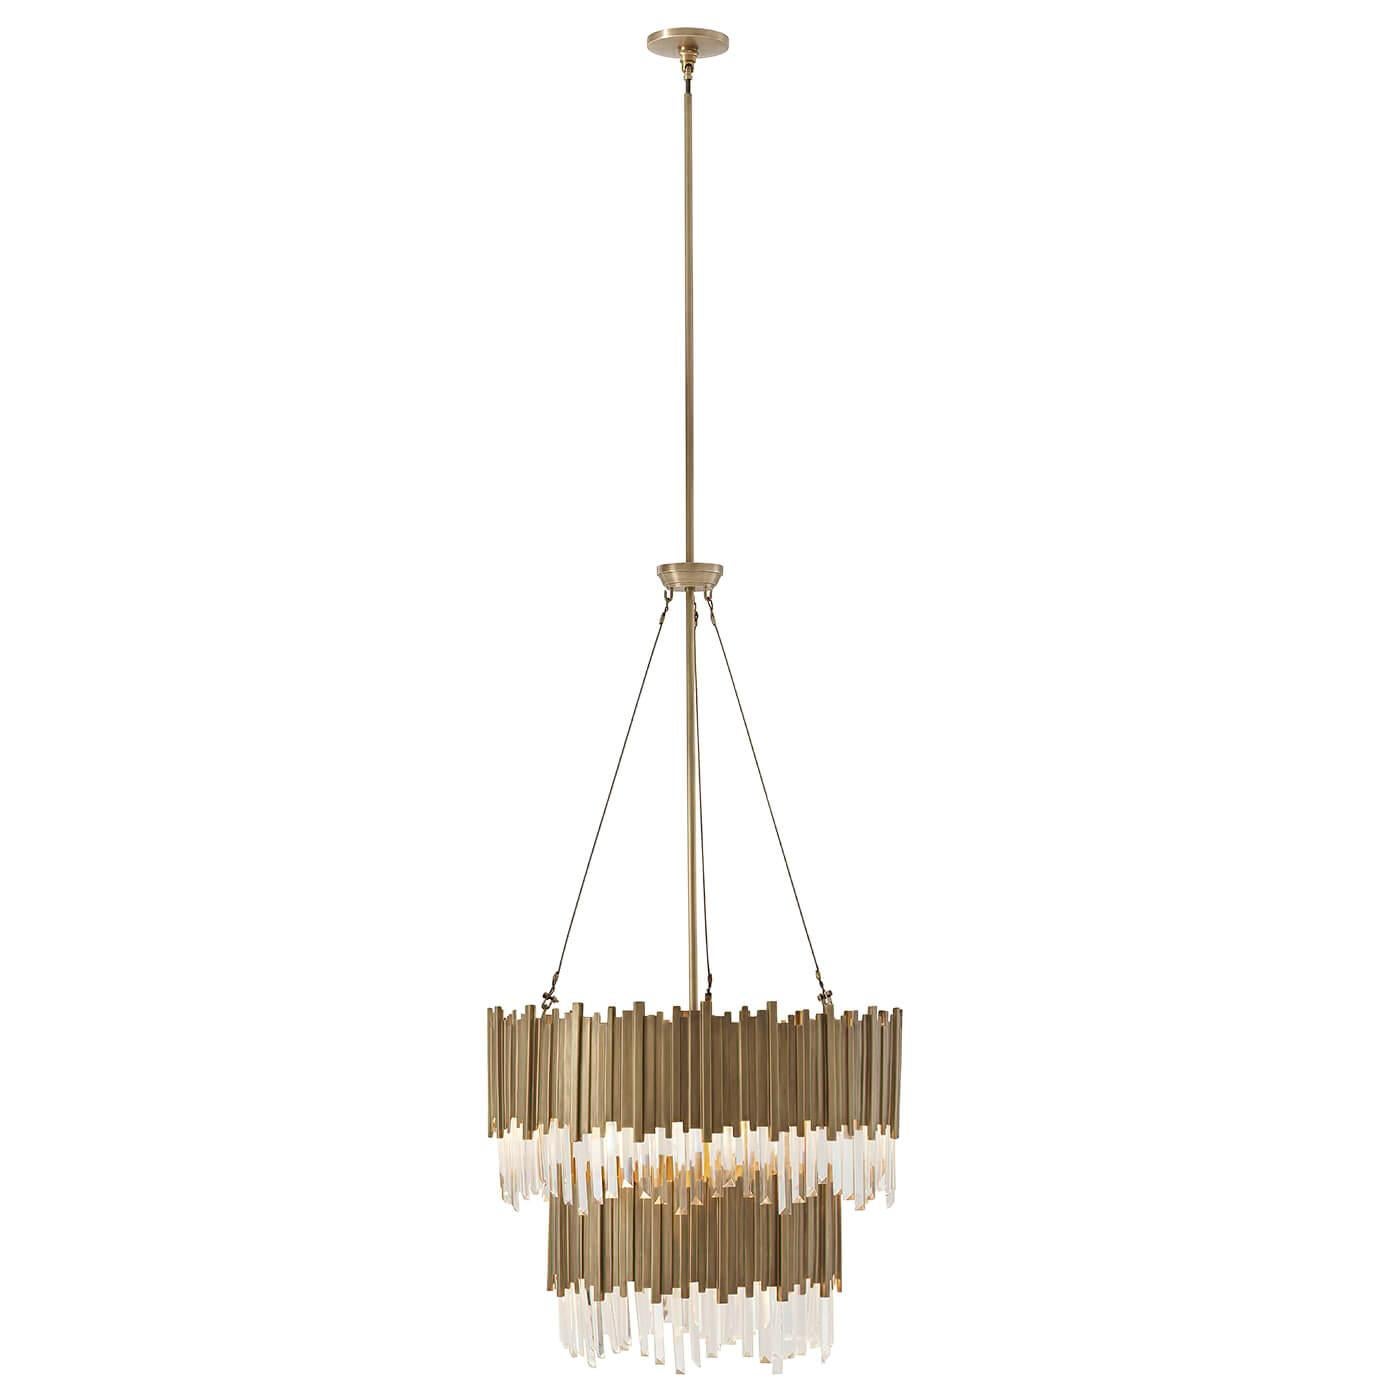 Modern two-tiered brass chandelier with brass stacked square rods, polished optical quality glass pendant crystals.
108